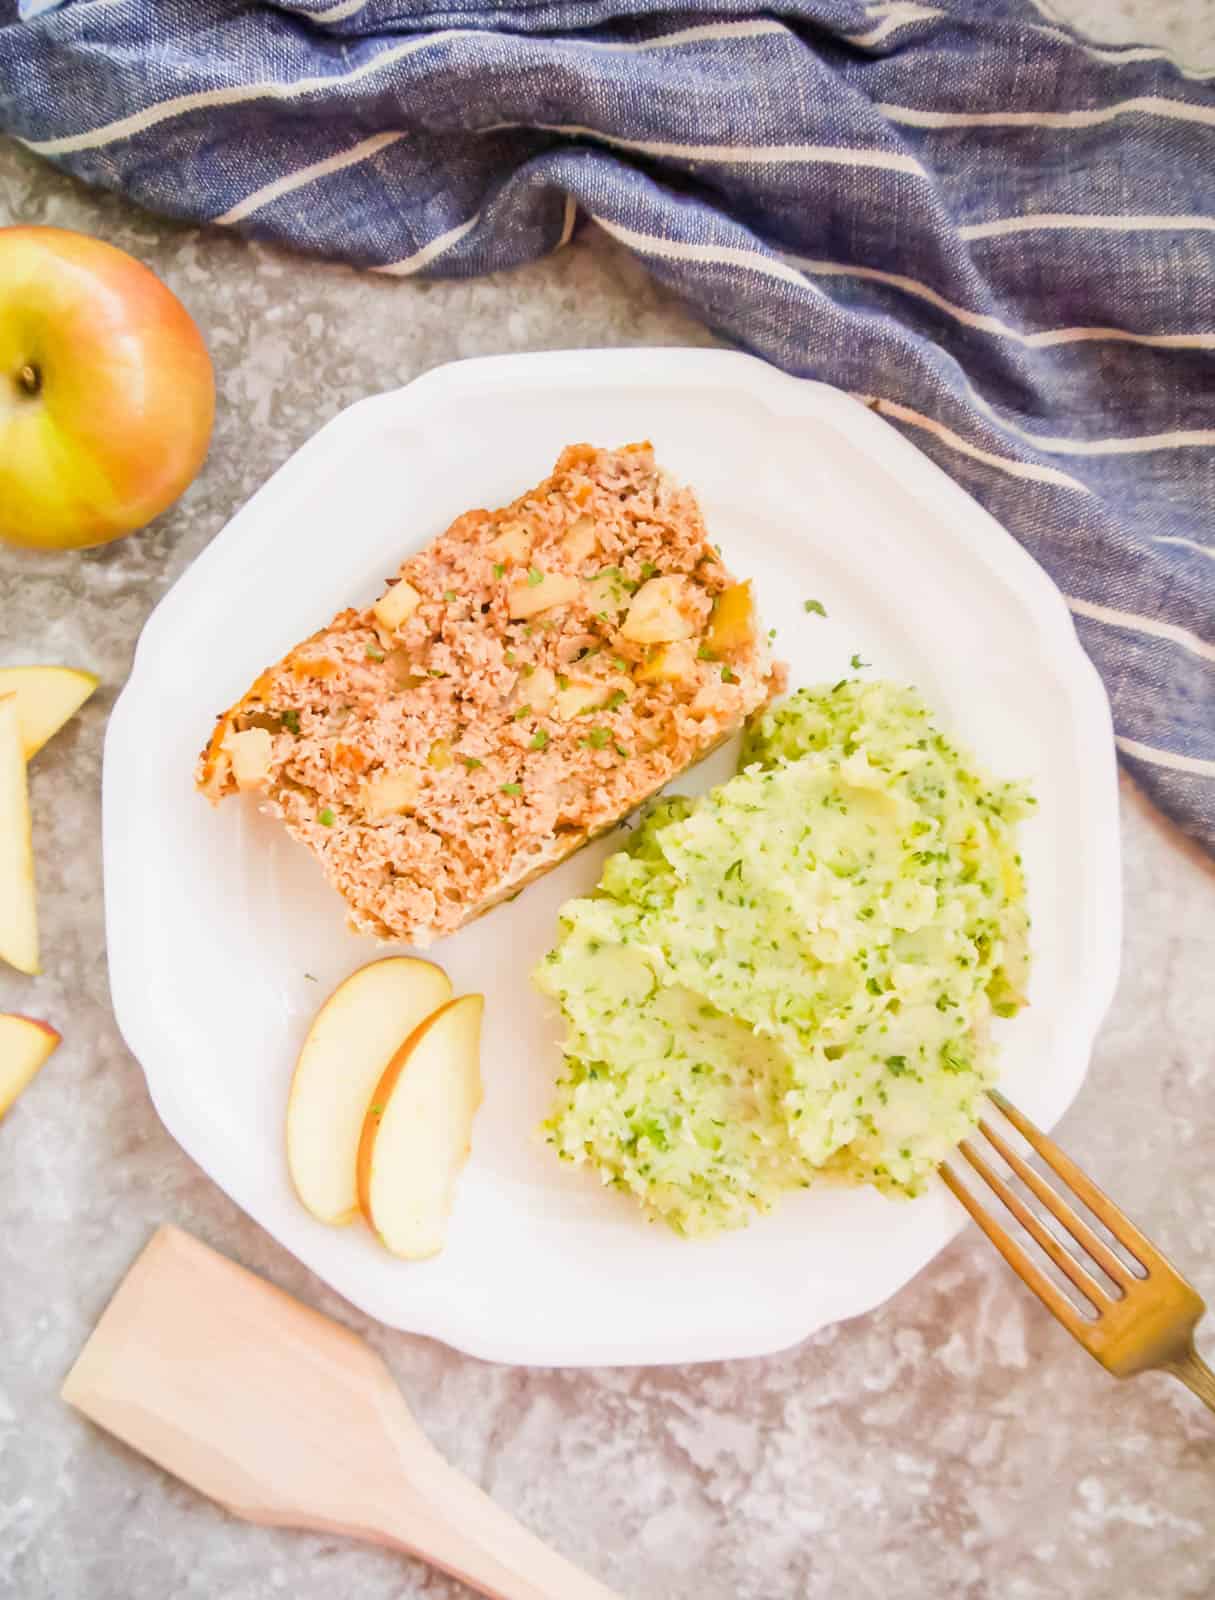 Apple and Sage Turkey Meatloaf (Paleo, Whole30) | Perchance to Cook, www.perchancetocook.com